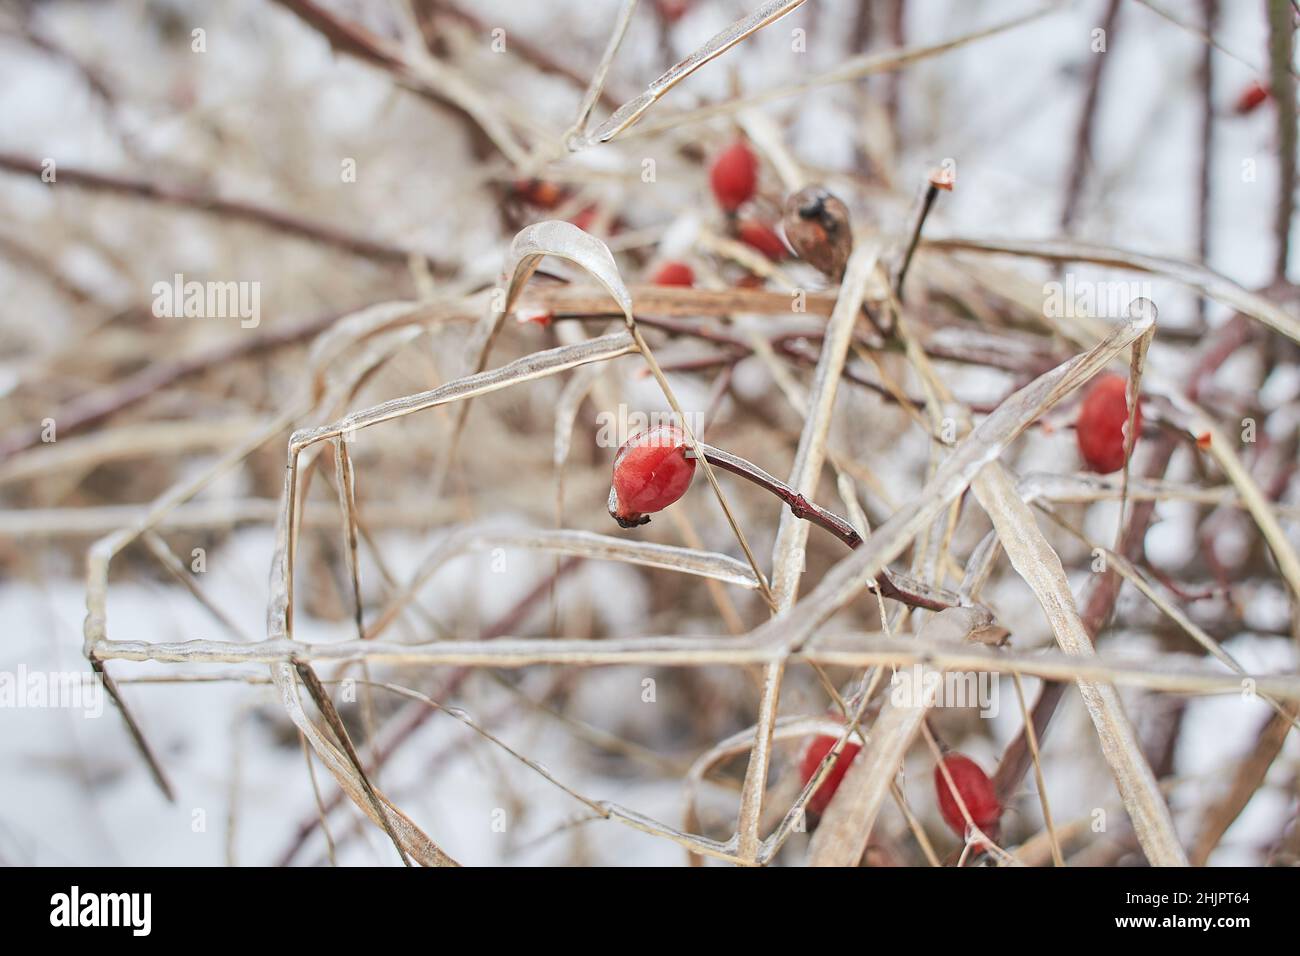 Branches of rose hip, berry covered with ice crust after freezing rain, fragment, background Stock Photo